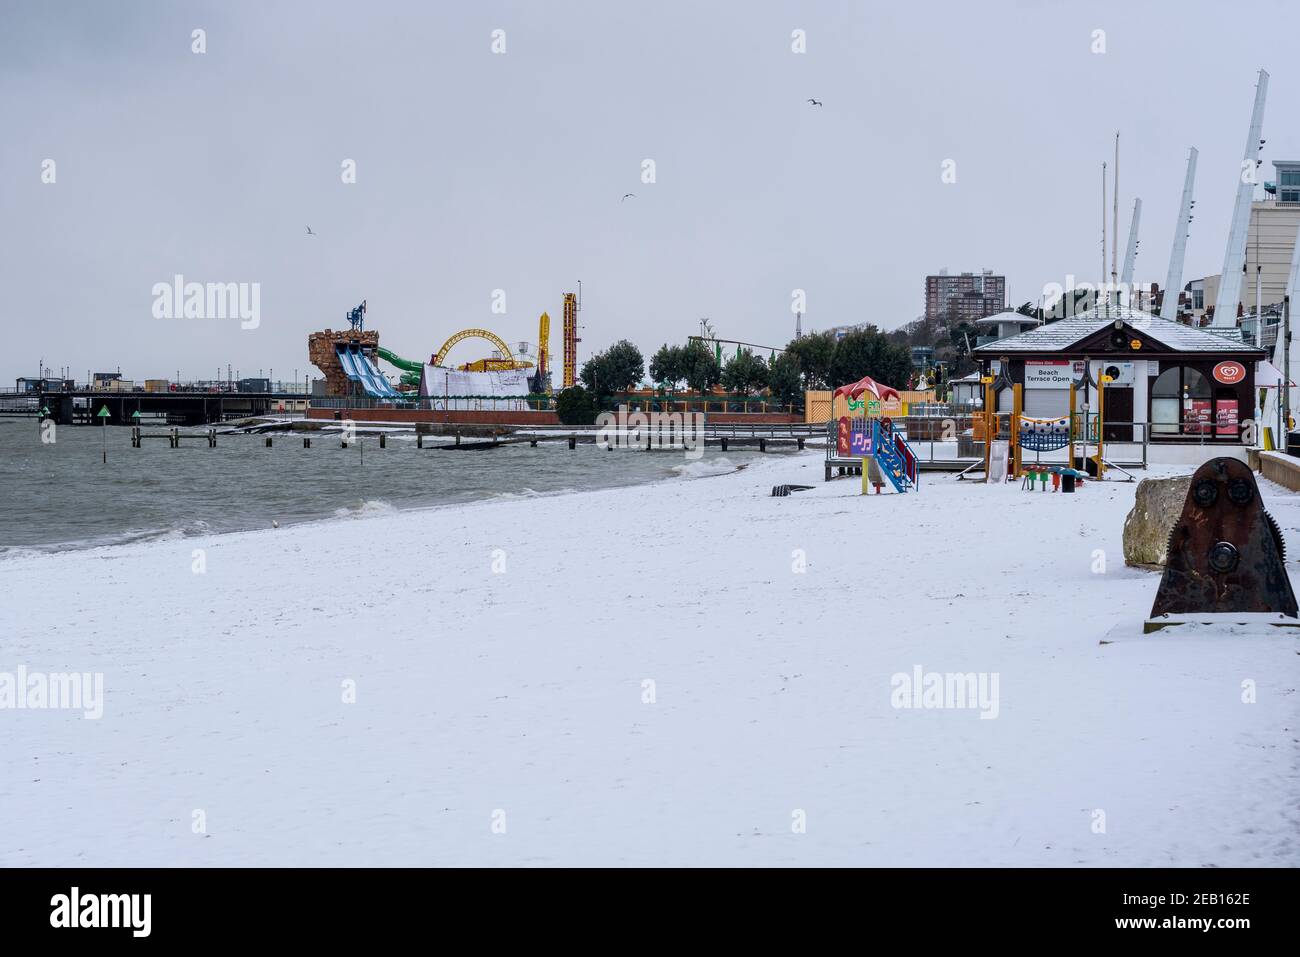 Jubilee Beach in Southend on Sea, Essex, UK, with snow from Storm Darcy. Snow covered beach, seafront attractions Stock Photo